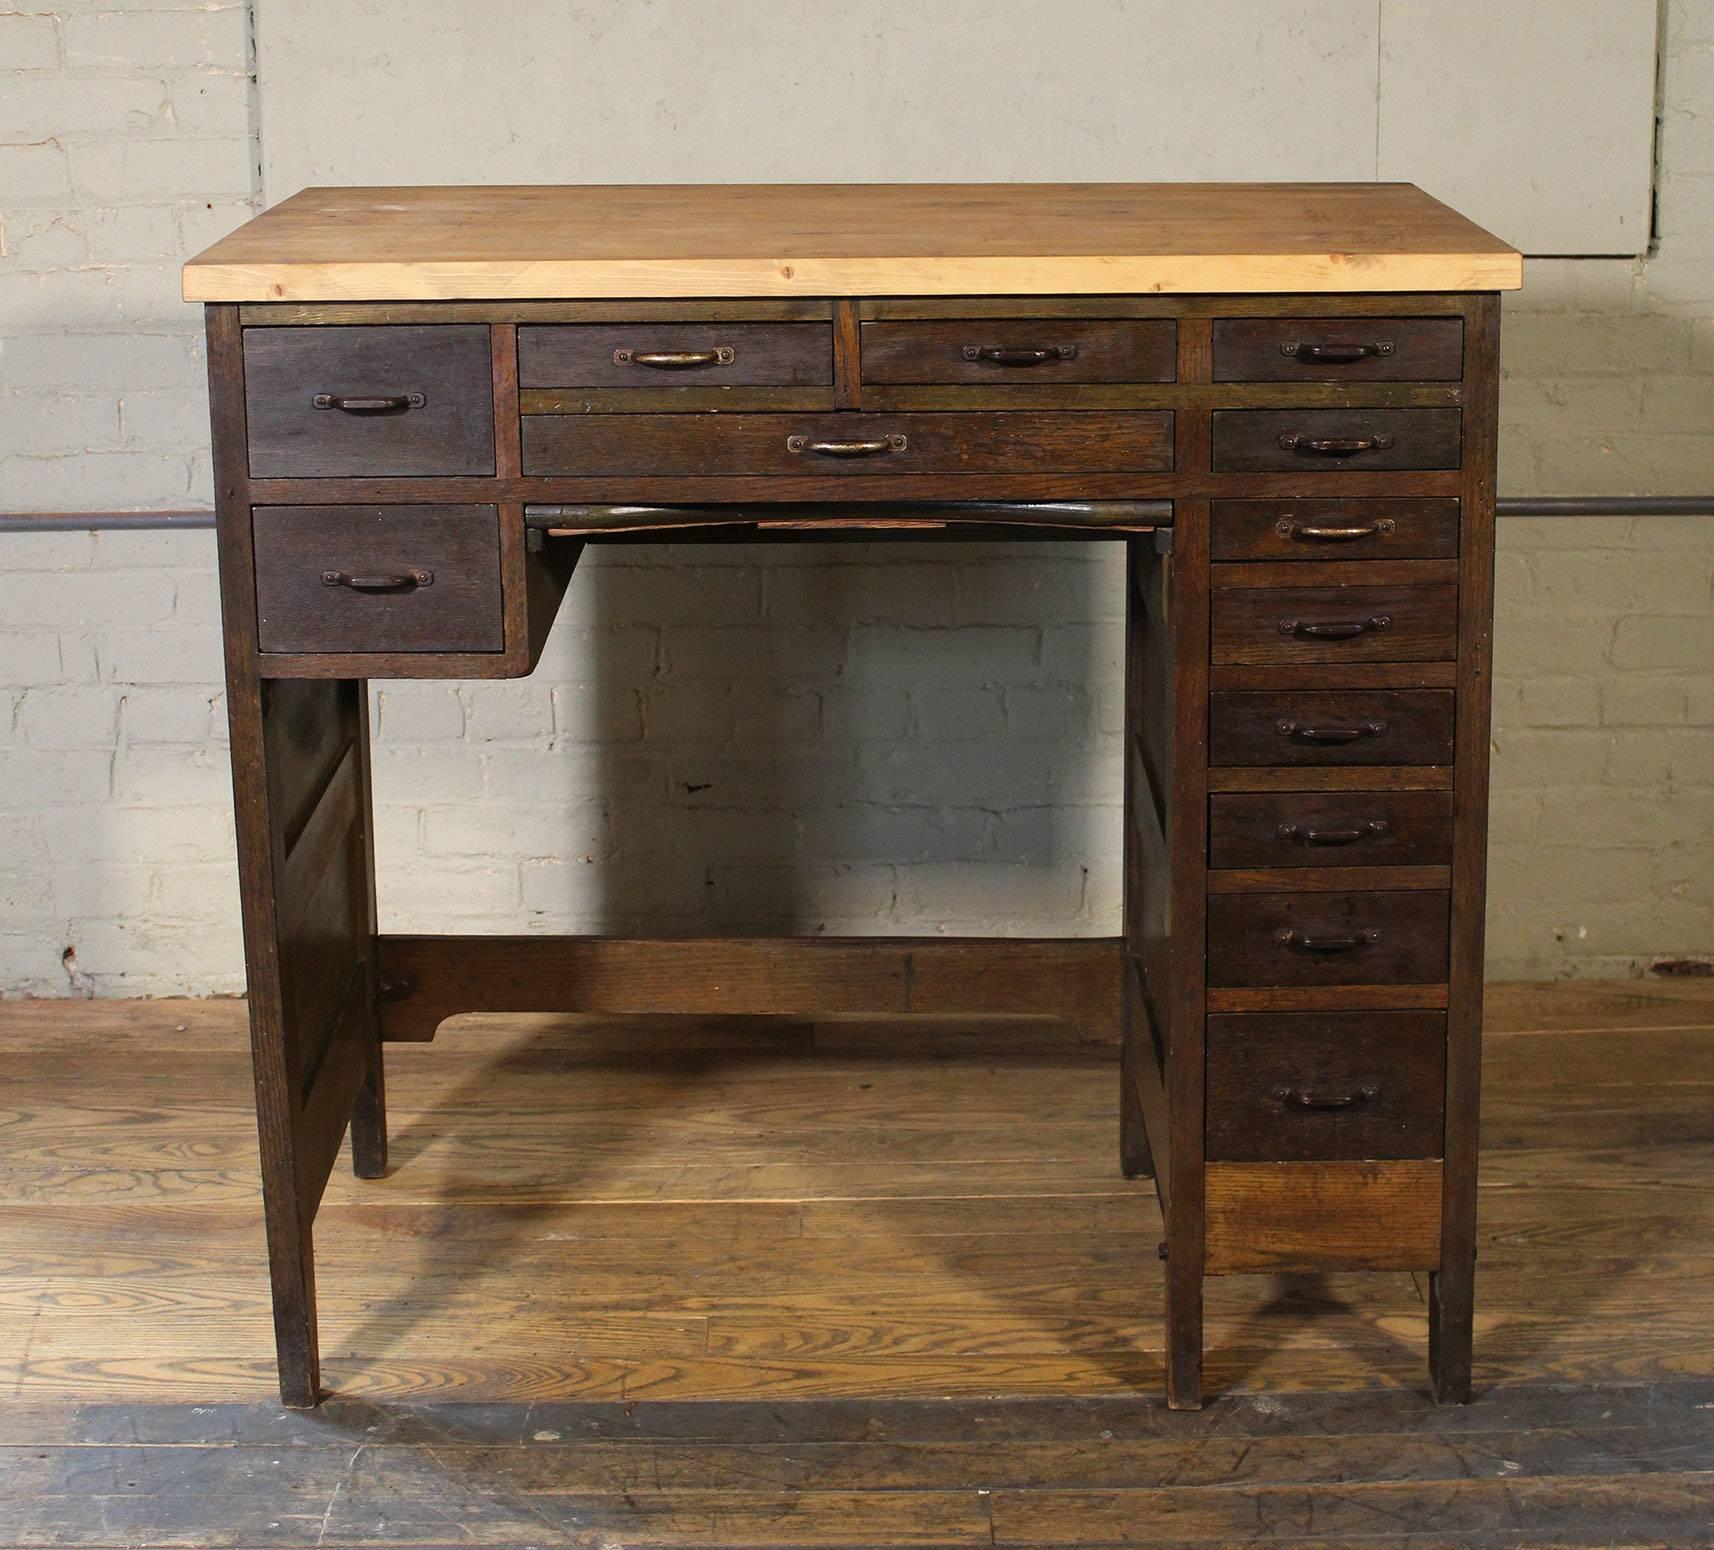 Vintage jewelers workbench, desk, cabinet storage. From the Rhode Island School of Design. Overall dimensions - 41 1/8